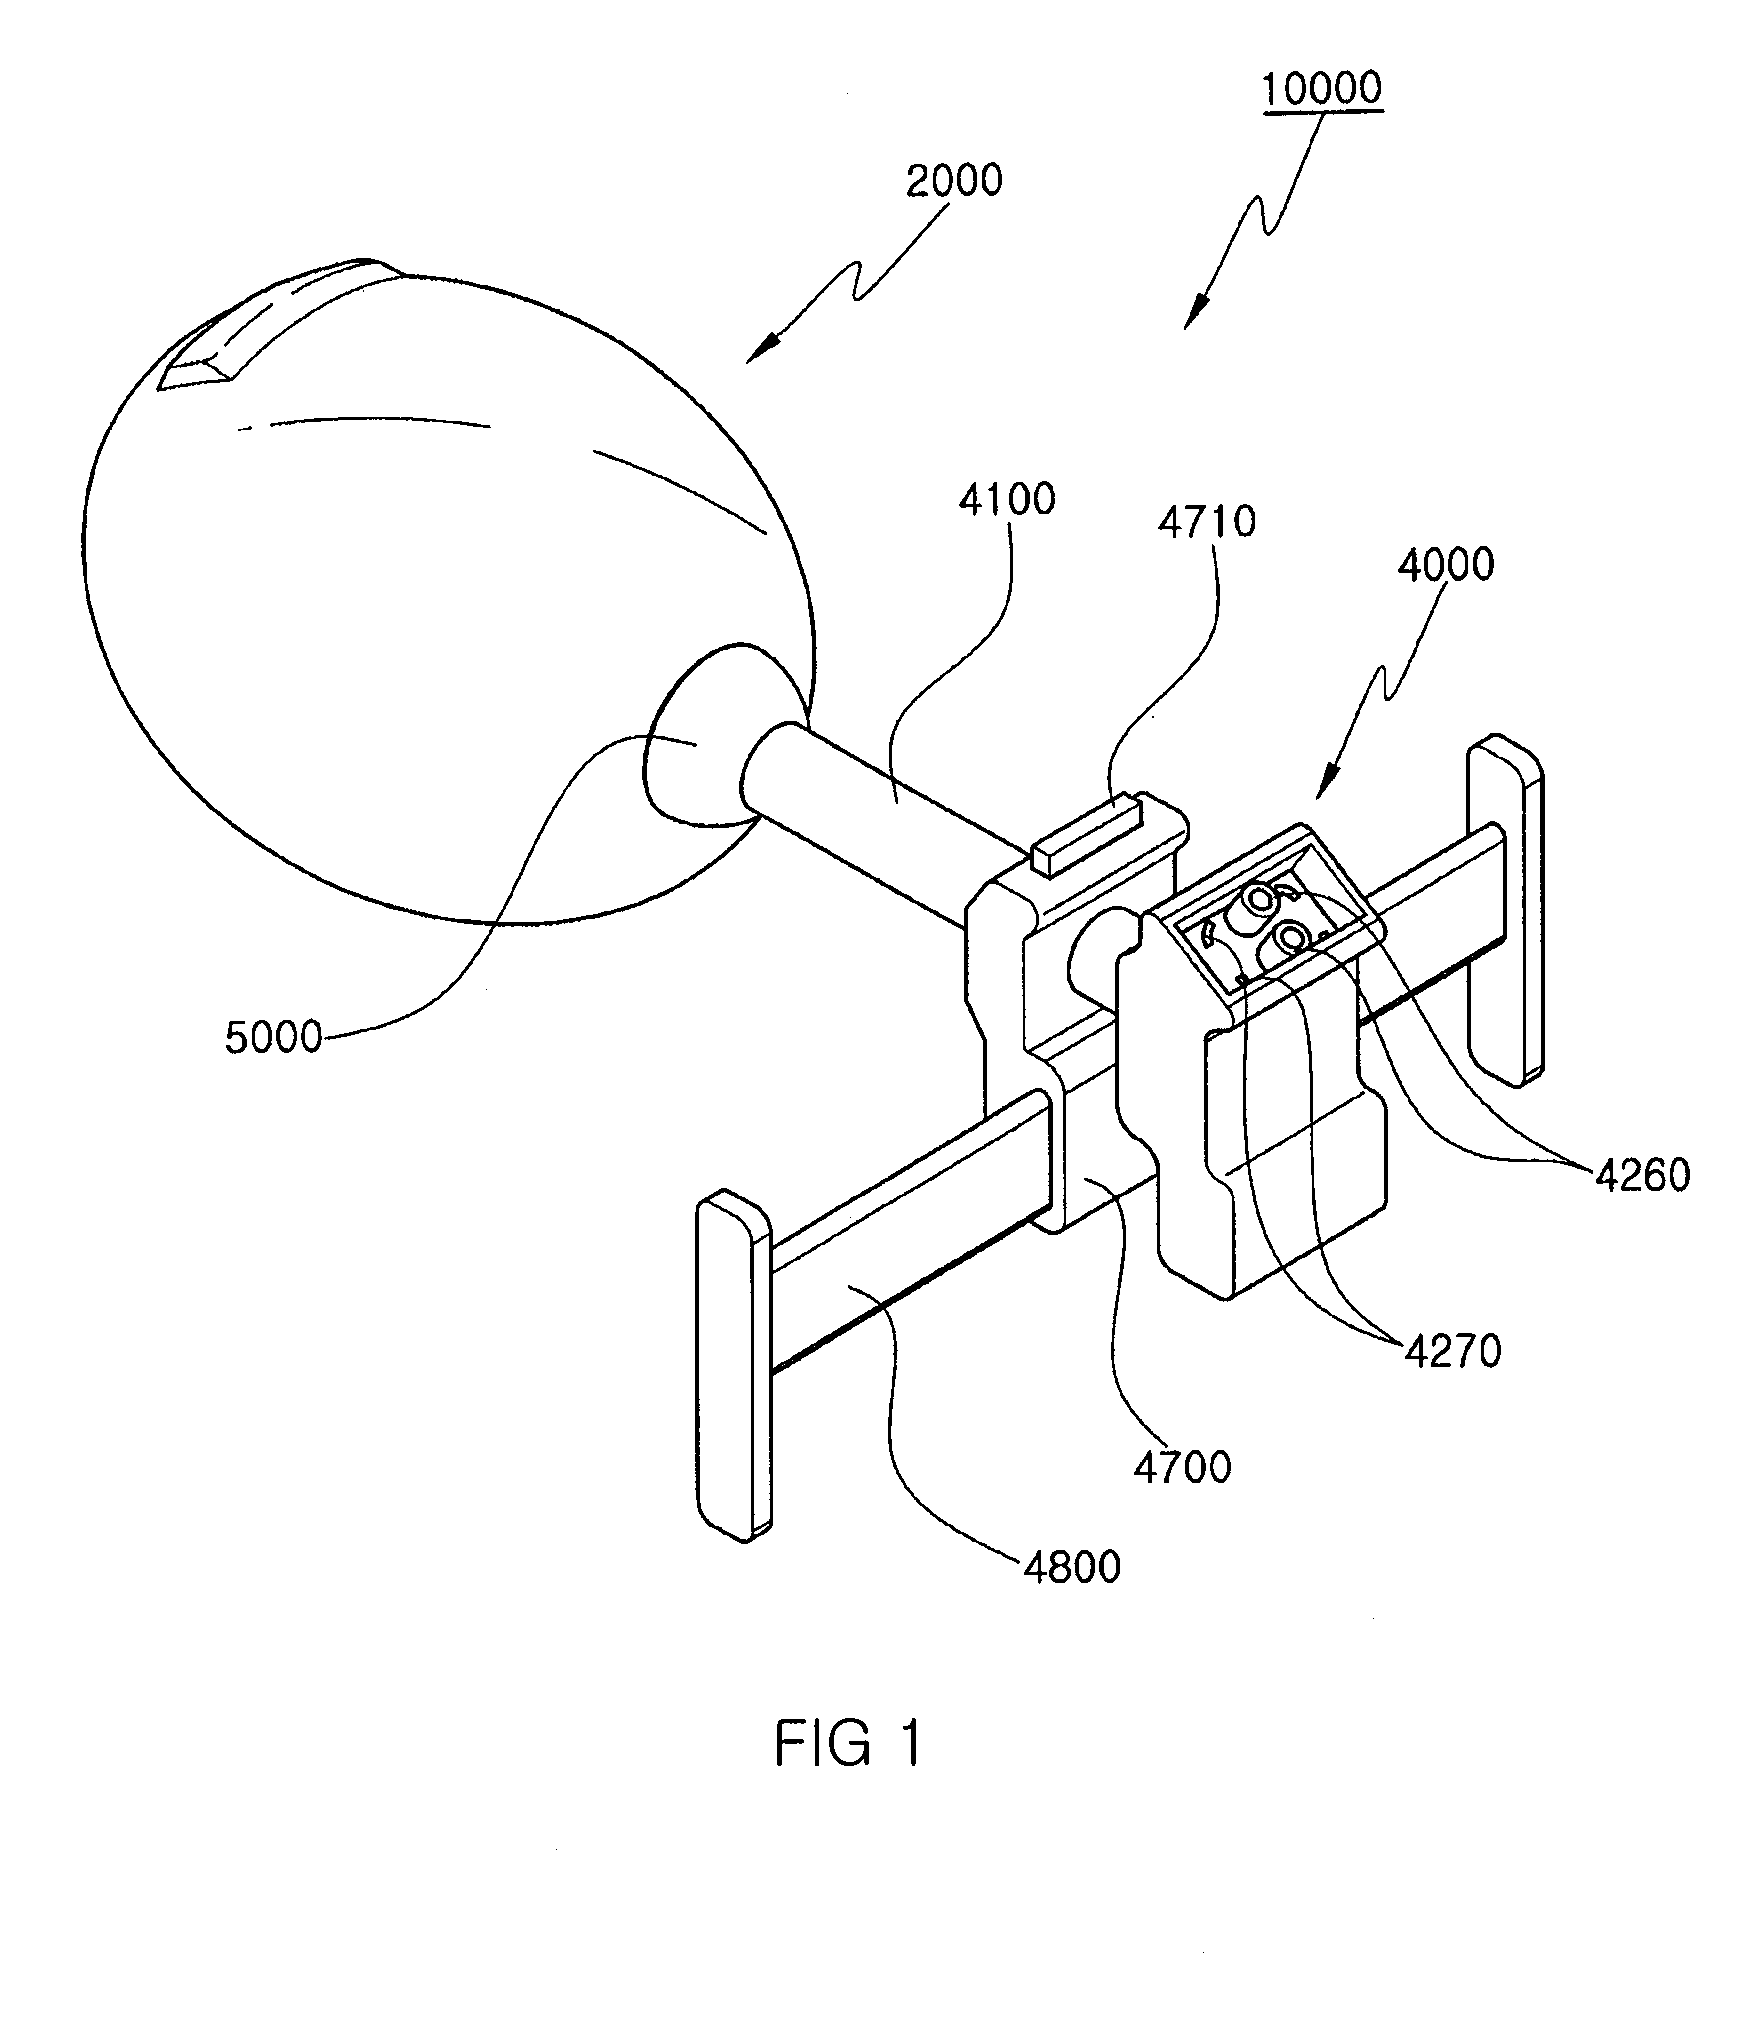 Apparatus For Examining and Curing Urinary Incontinence, and For Exercising Bio-Feedback of Women Vagina Muscles